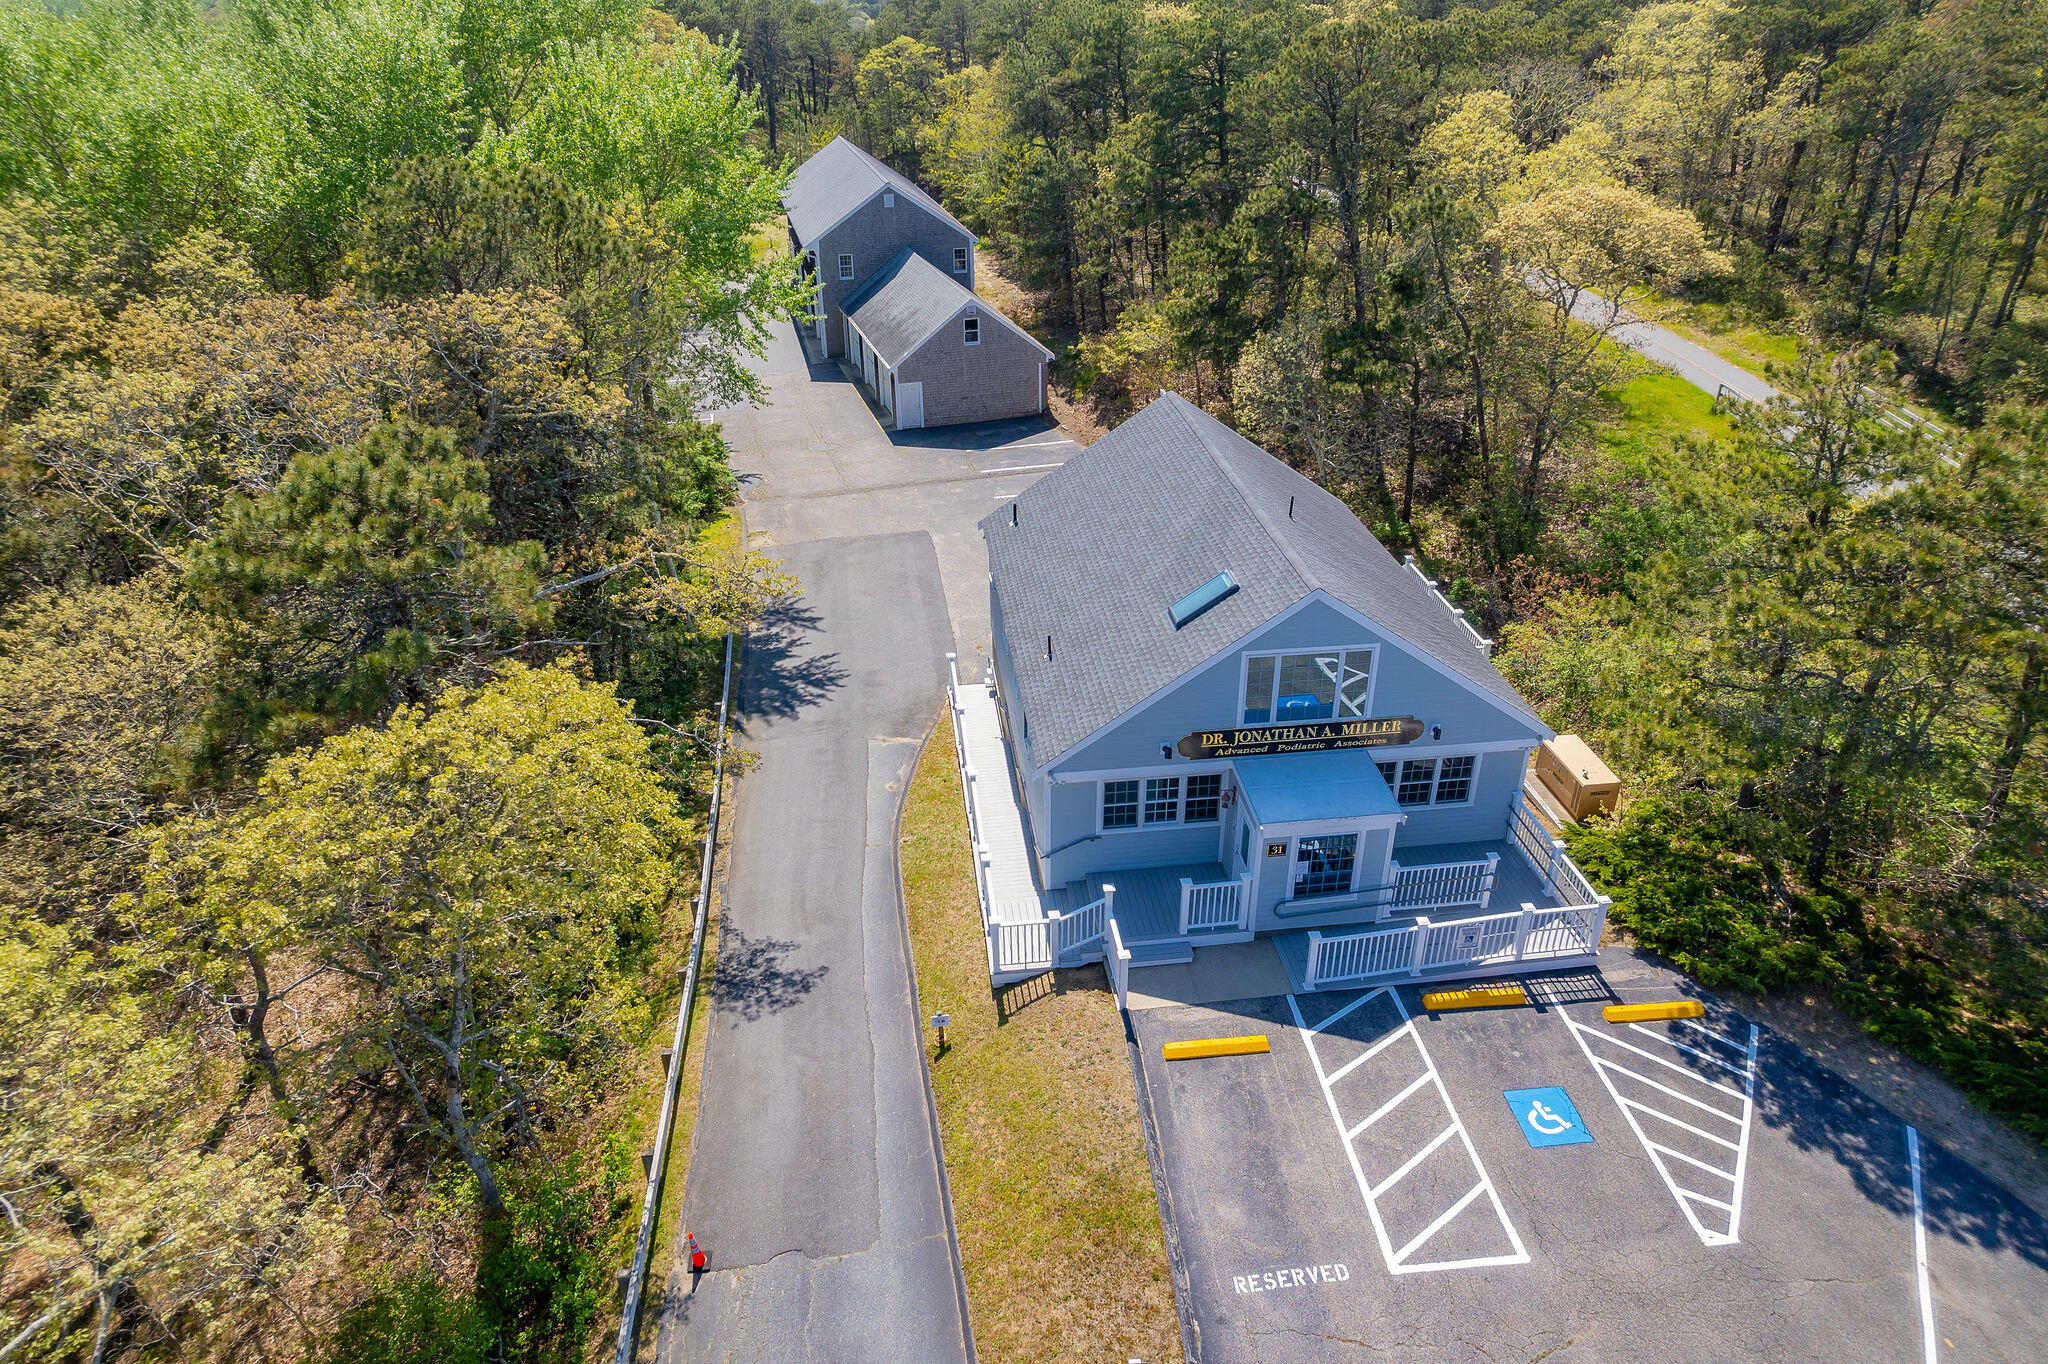 31 Meetinghouse Road, South Chatham, Massachusetts 02659, ,Commercial Sale,For Sale,31 Meetinghouse Road,22400951